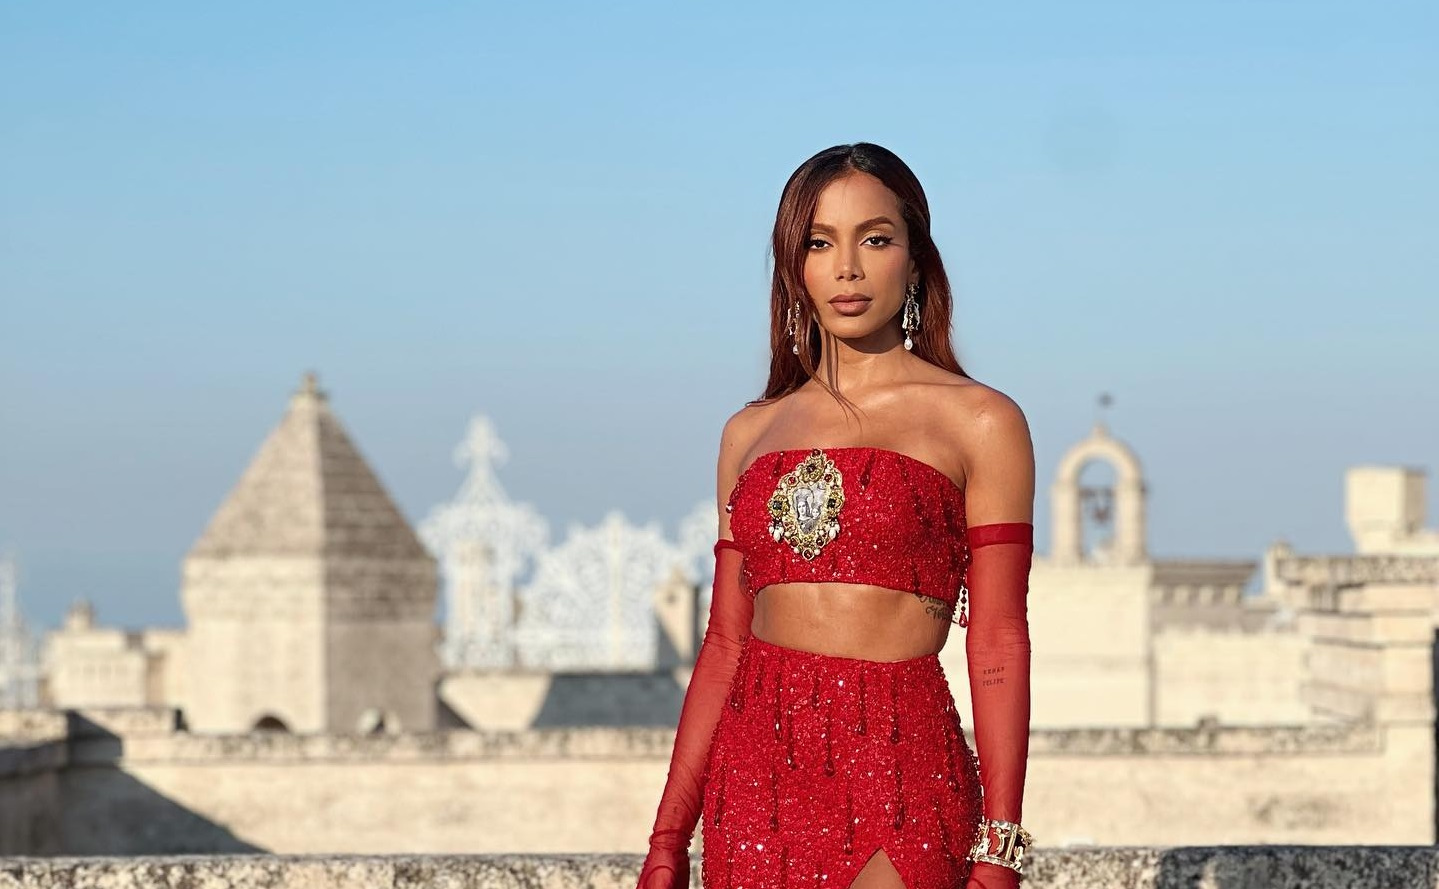 Anitta continues to feed the rumors of romance with Simone Sussina.